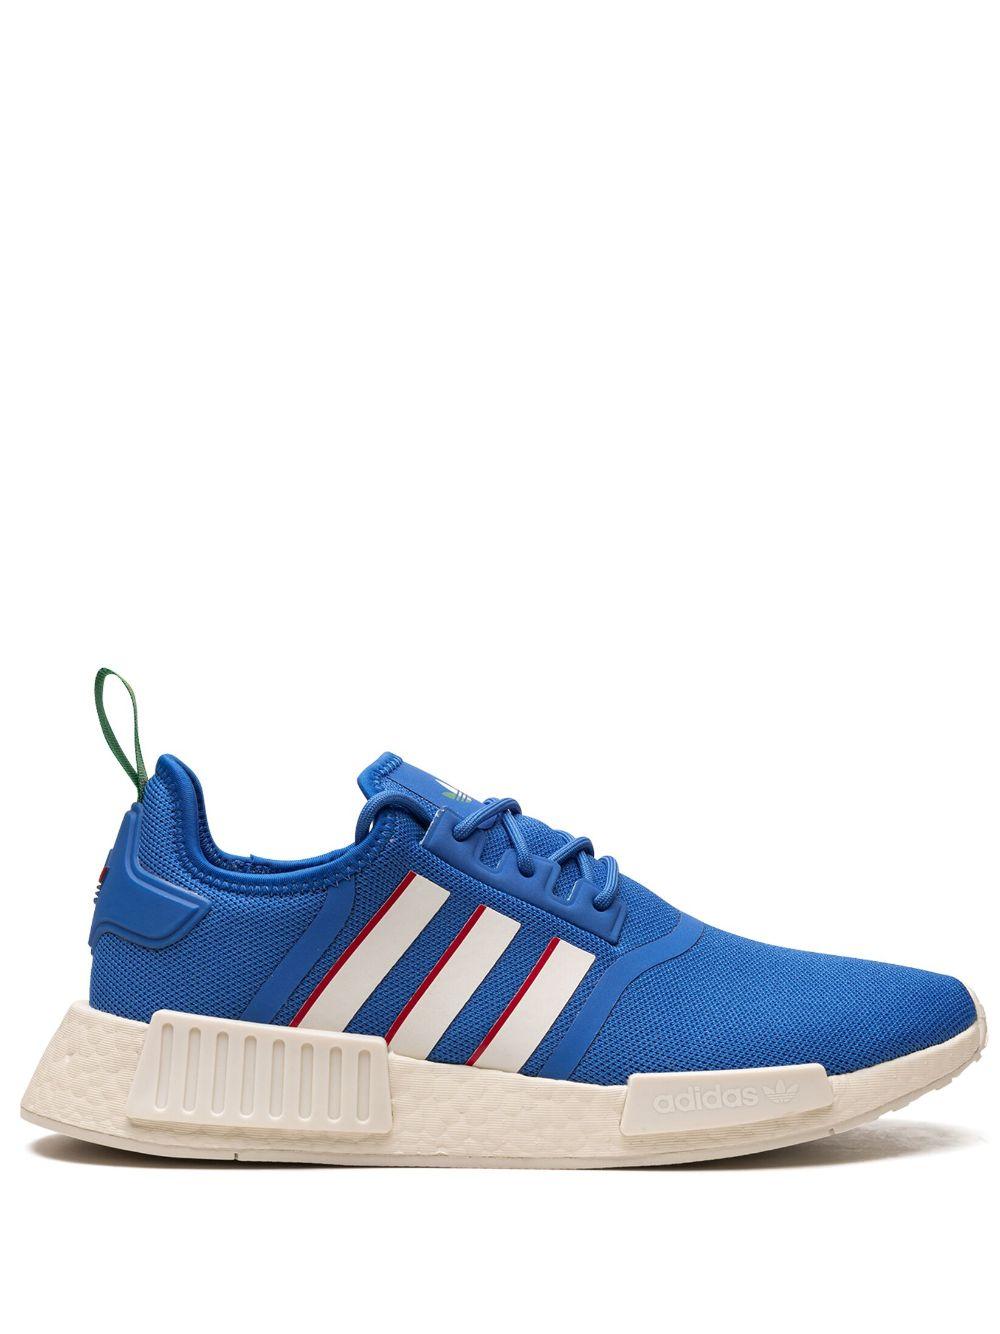 adidas Nmd_r1 "red / Royal Blue / Off White" Sneakers for Men | Lyst